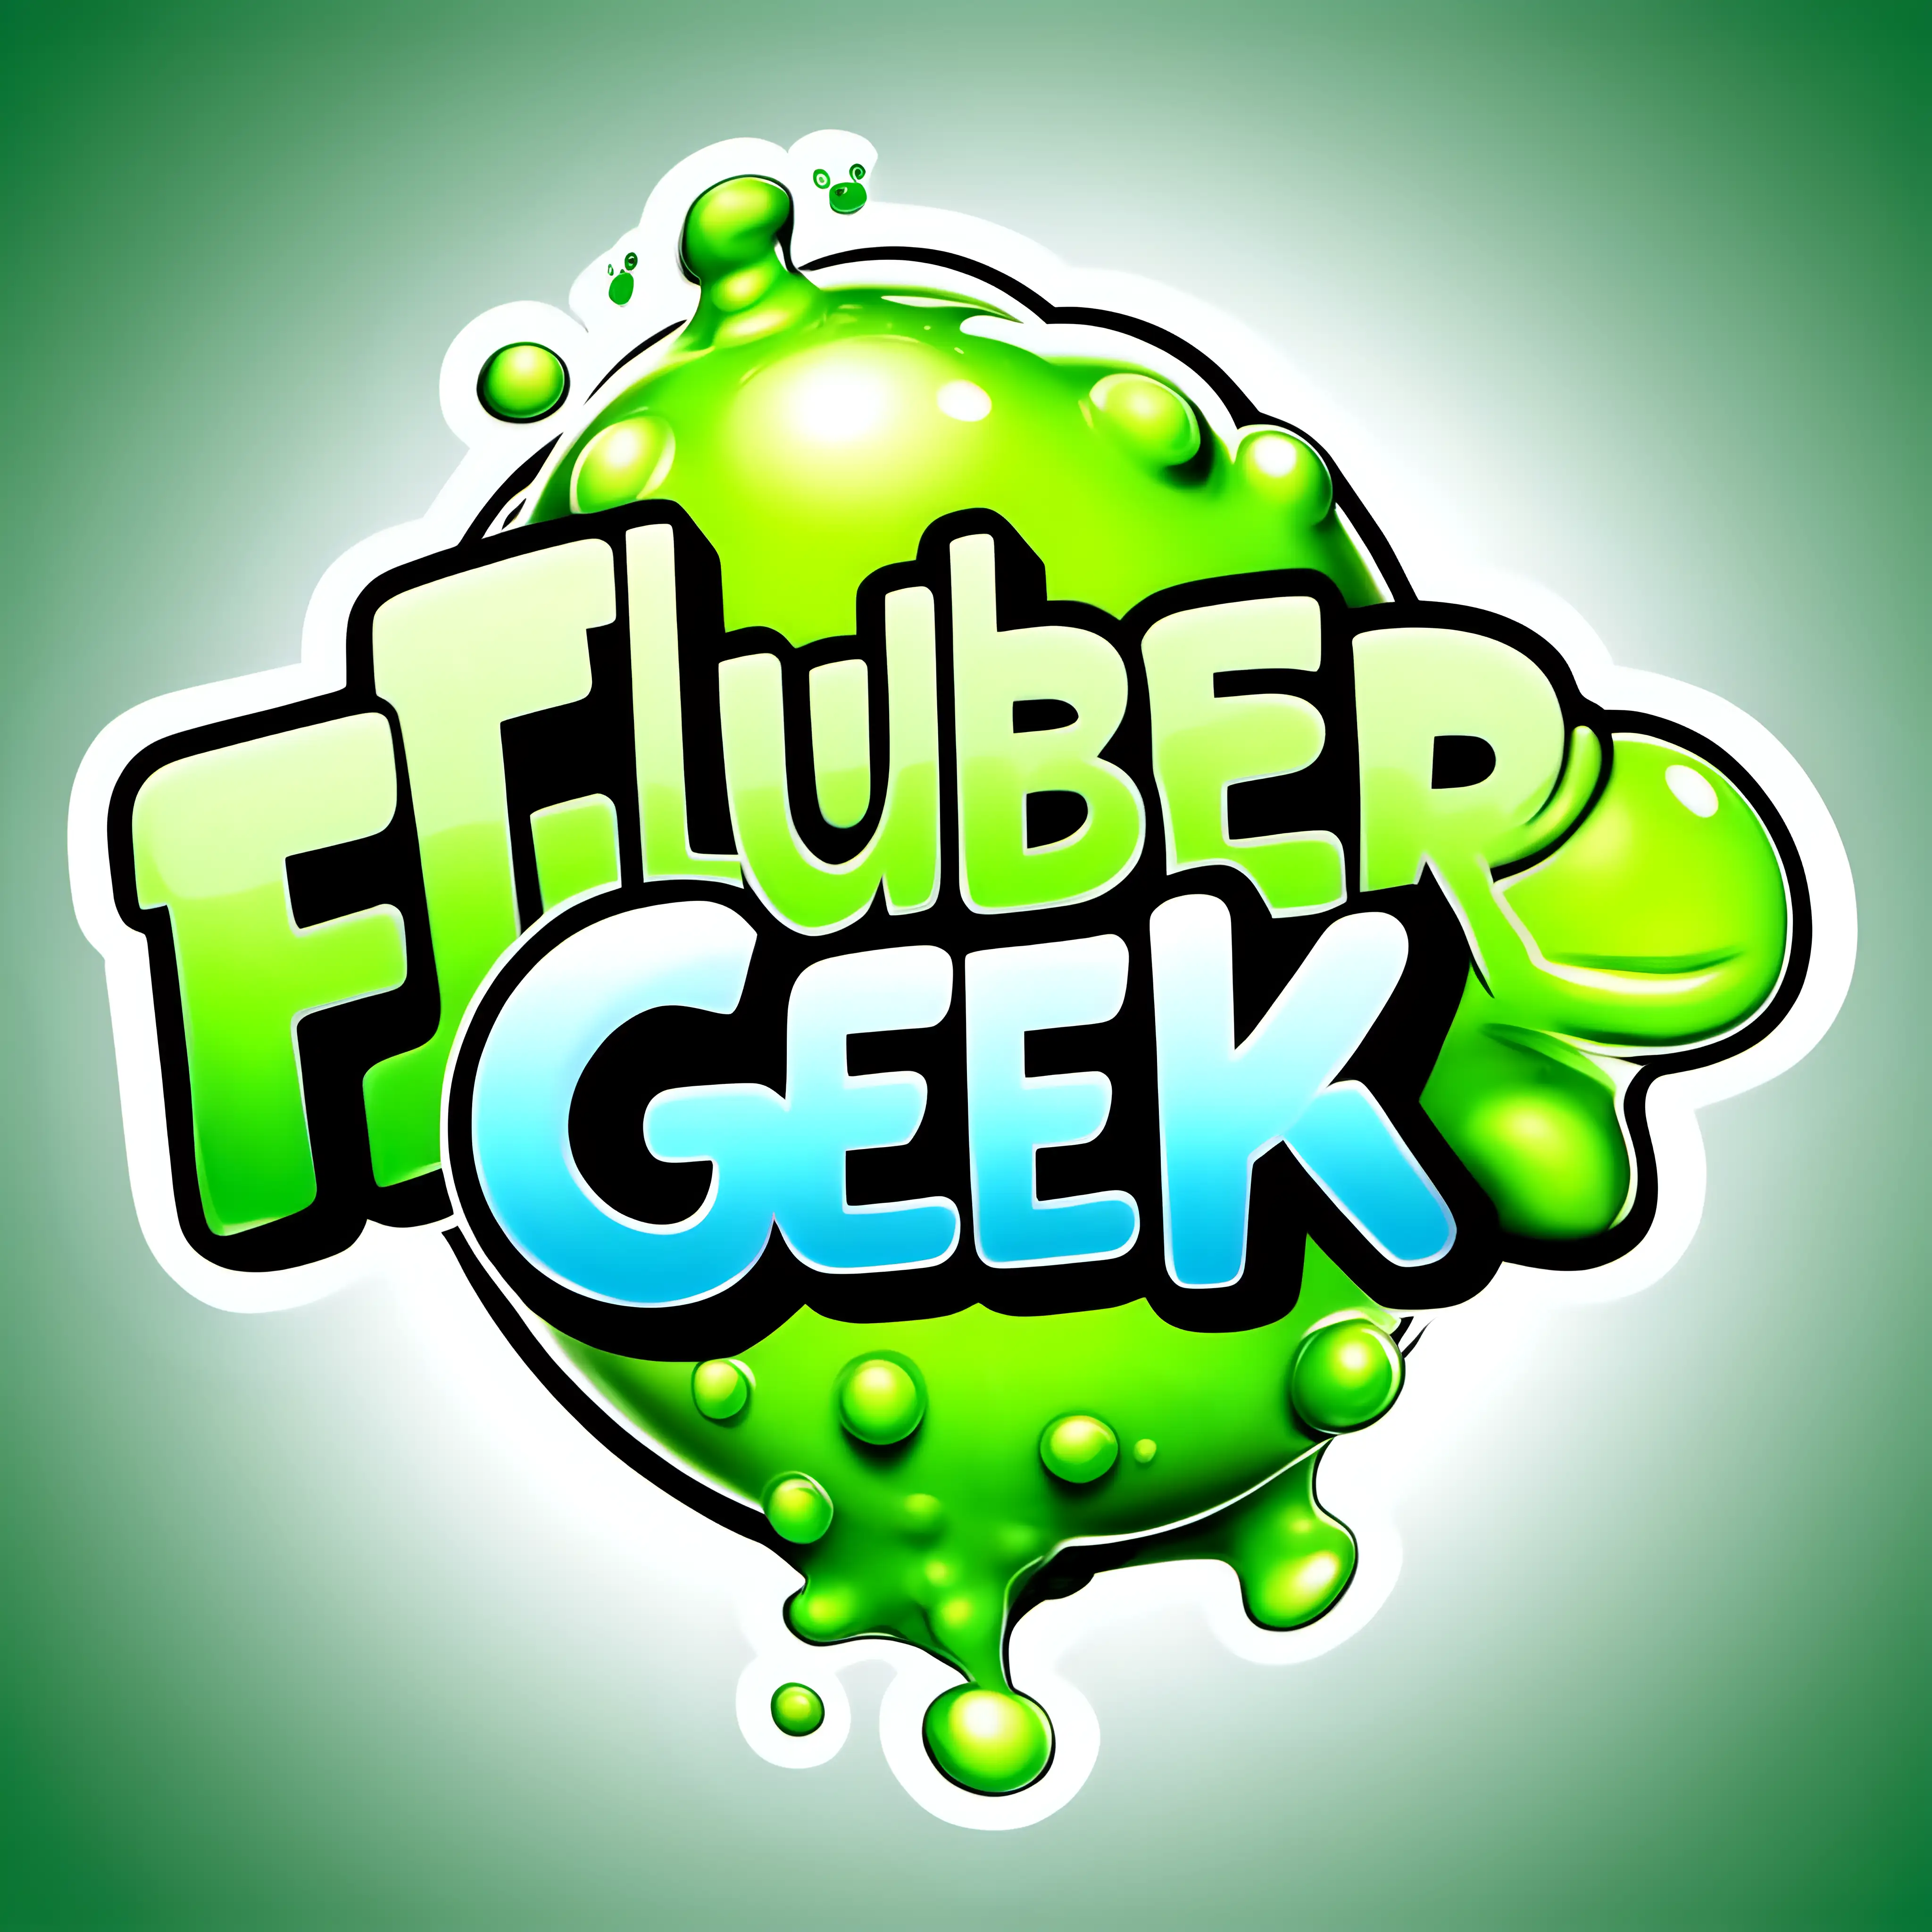 Flubber Geek YouTube Channel Logo Inspired by the Classic Movie